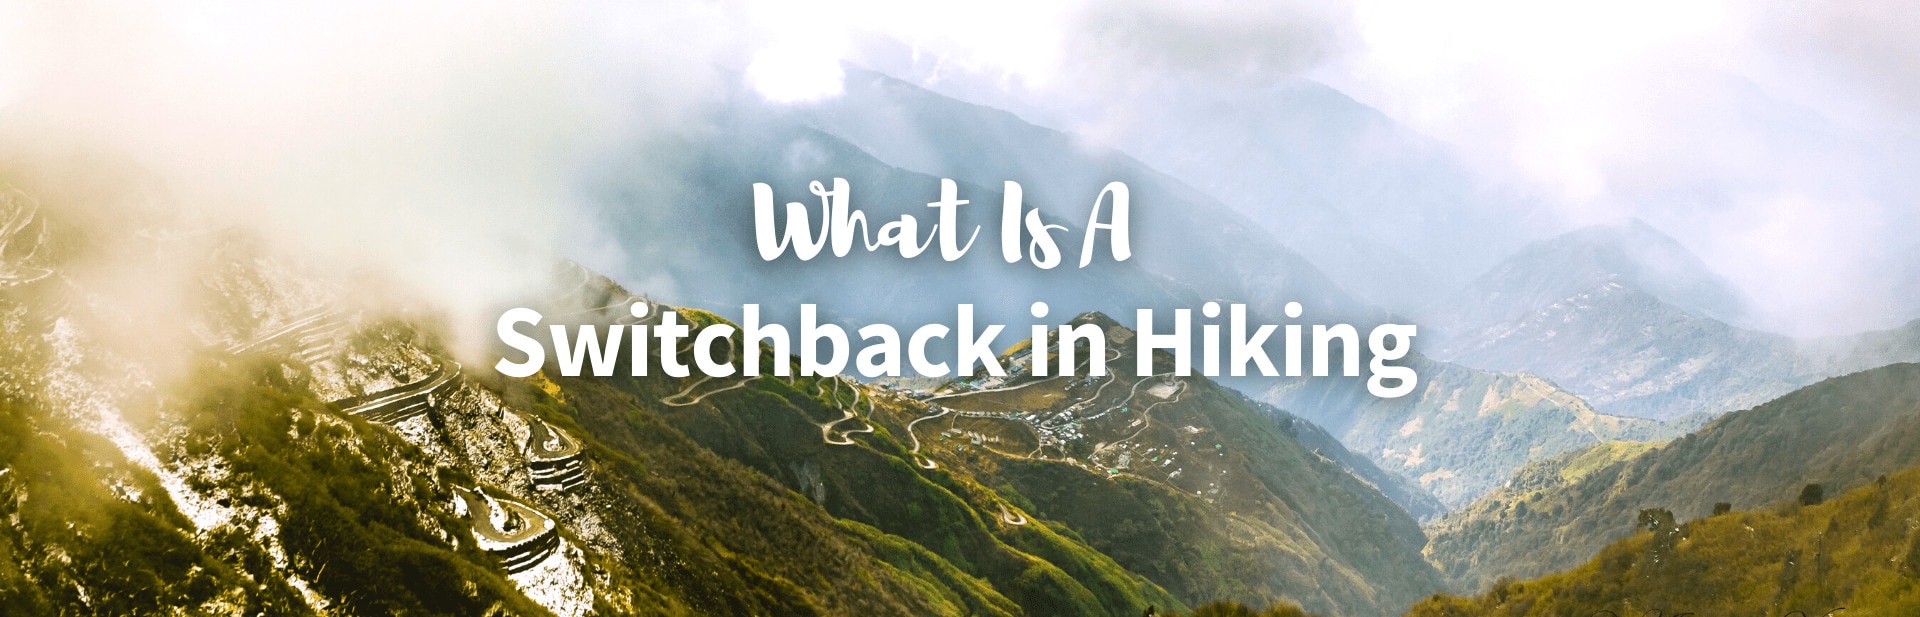 What Is a Switchback? Definition, Uses, and Tips for Happy Hiking